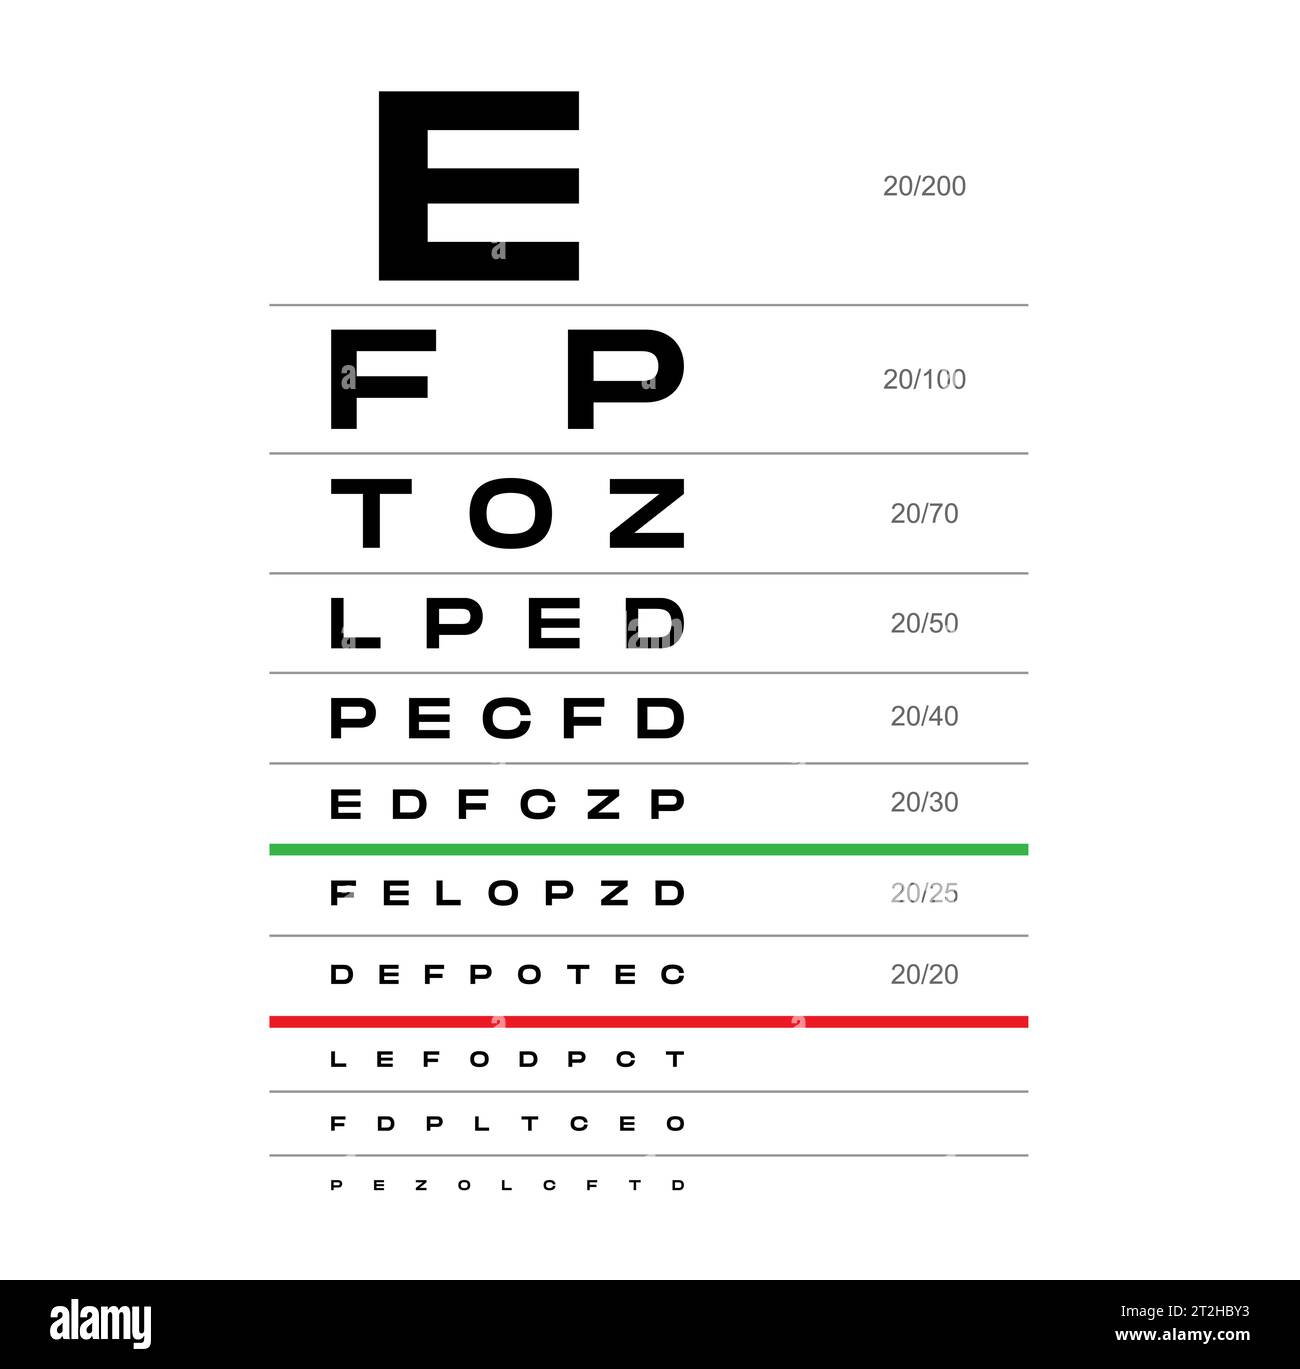 https://c8.alamy.com/comp/2T2HBY3/snellen-chart-eye-test-medical-illustration-line-vector-sketch-style-outline-isolated-on-white-background-vision-board-optometrist-ophthalmic-test-for-visual-examination-checking-optical-glasses-2T2HBY3.jpg